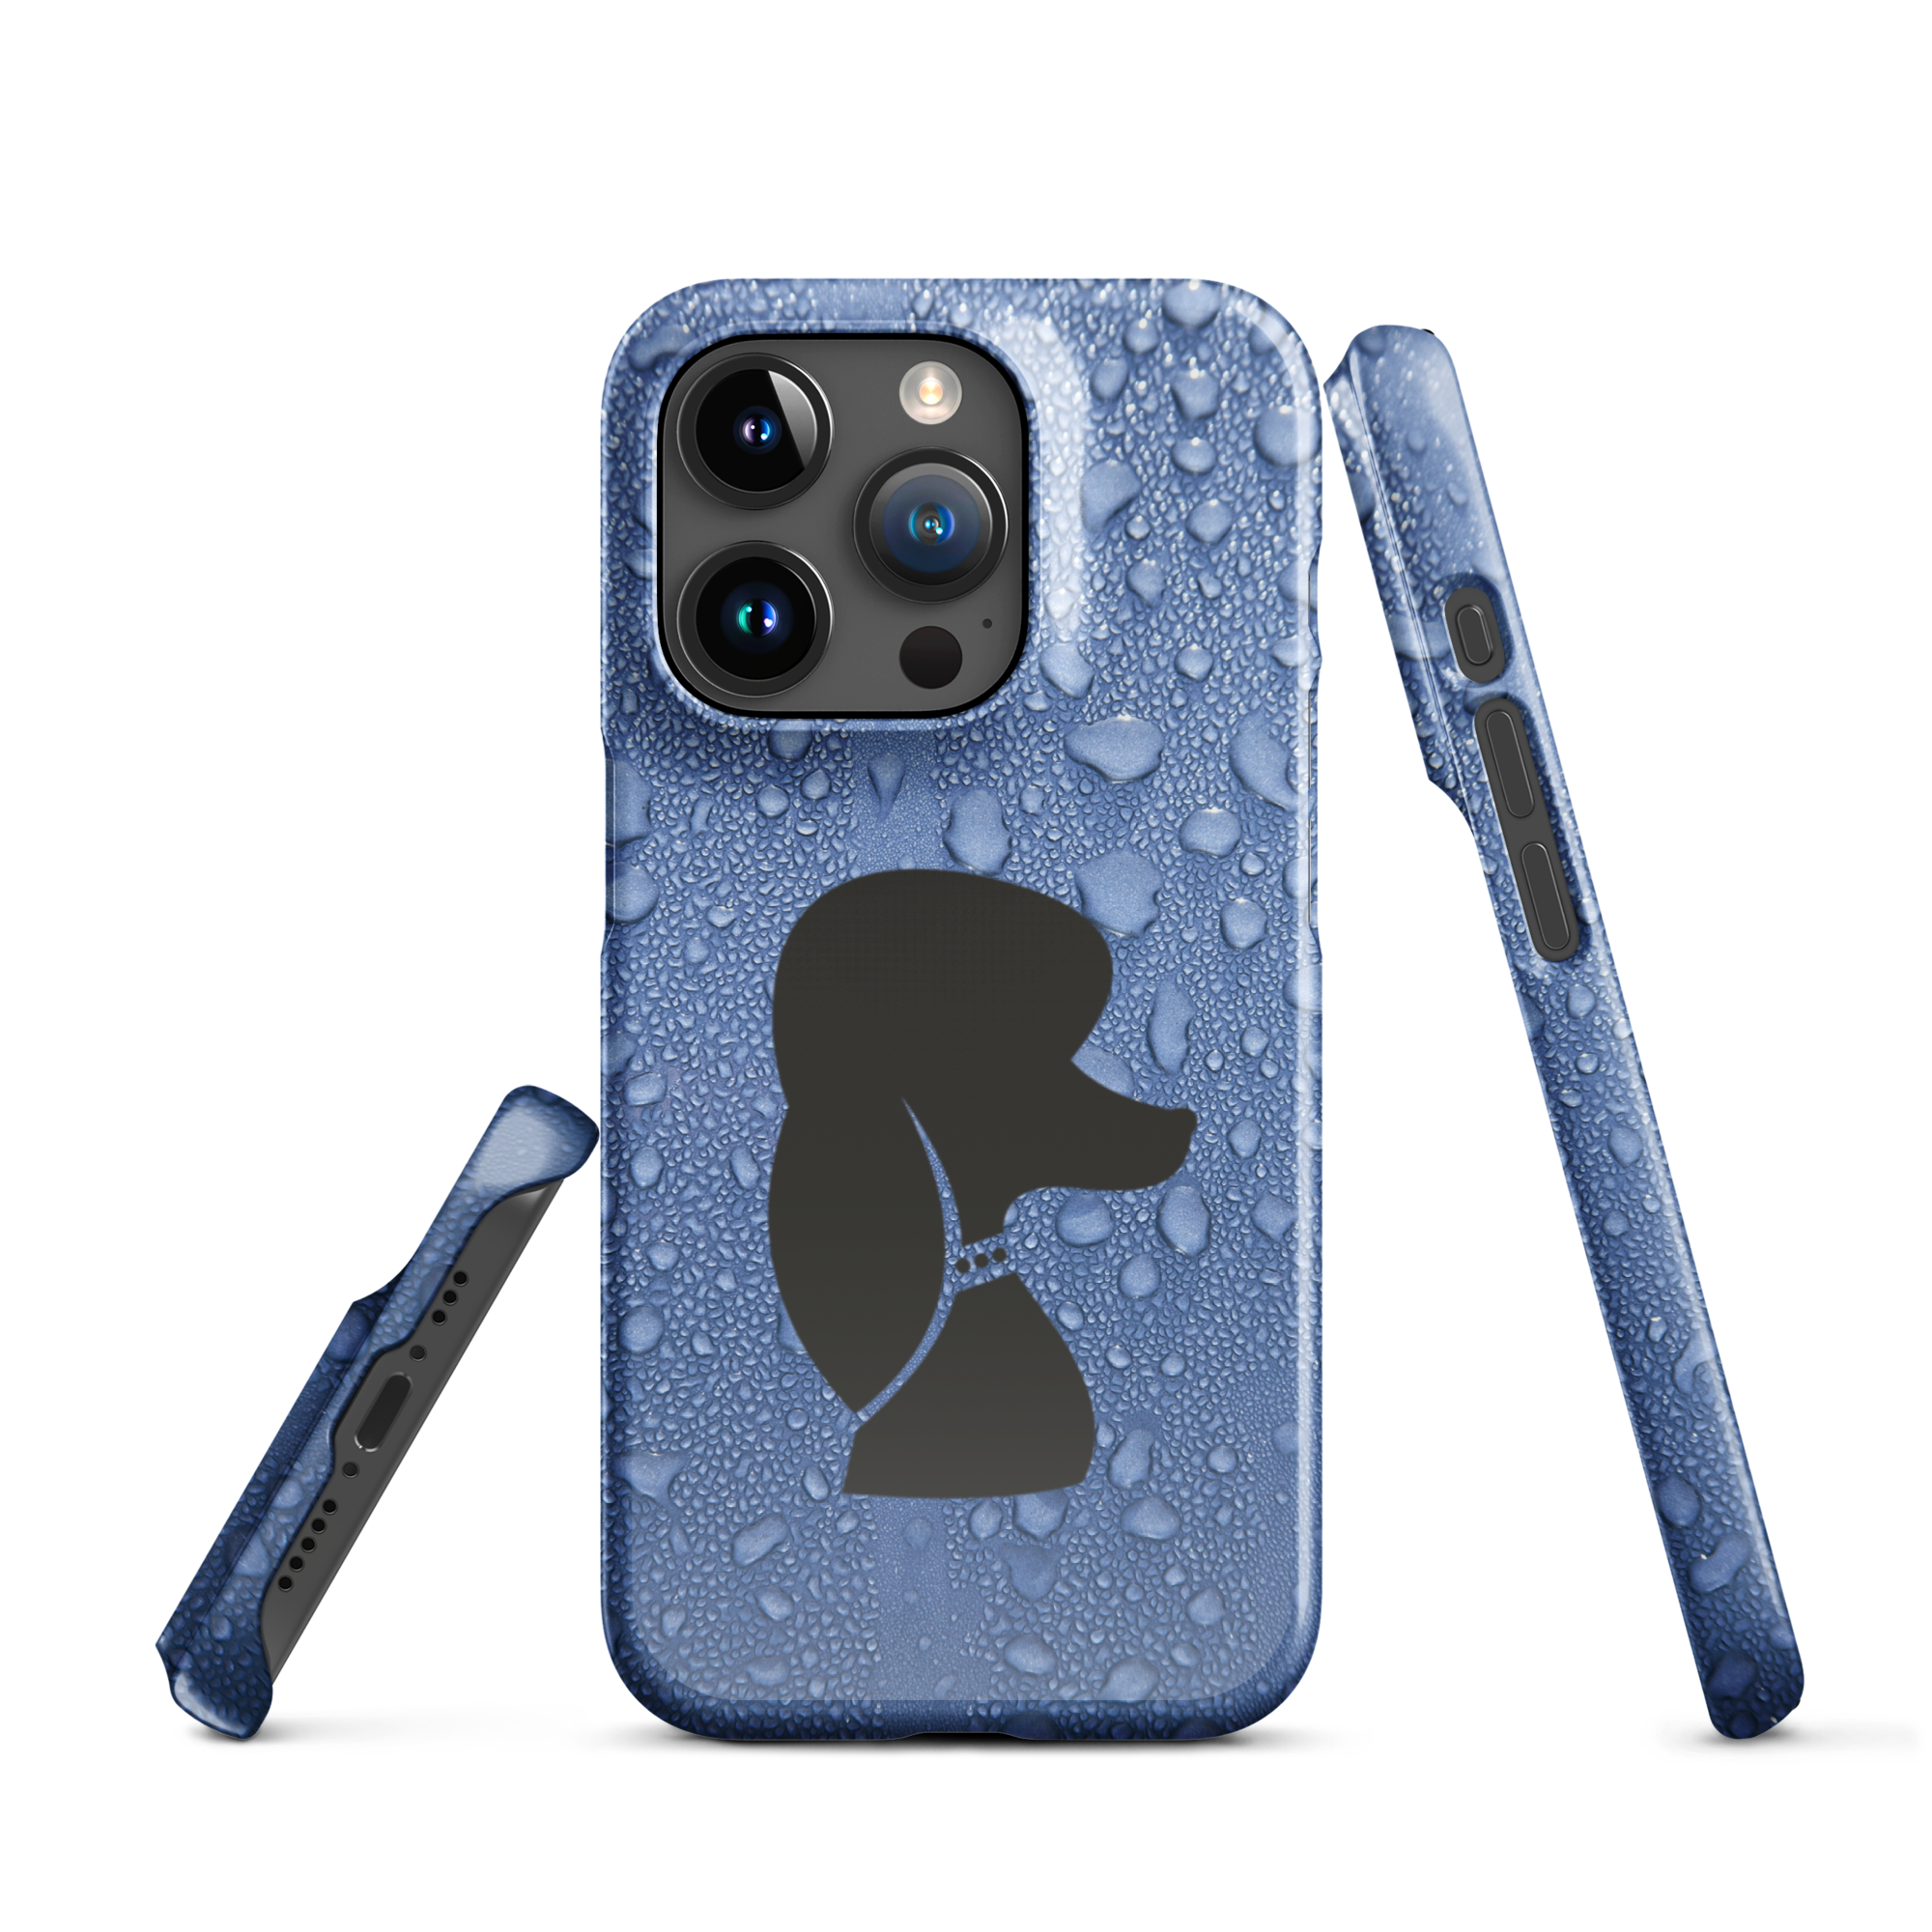 Poodle Rain Snap case for iPhone®